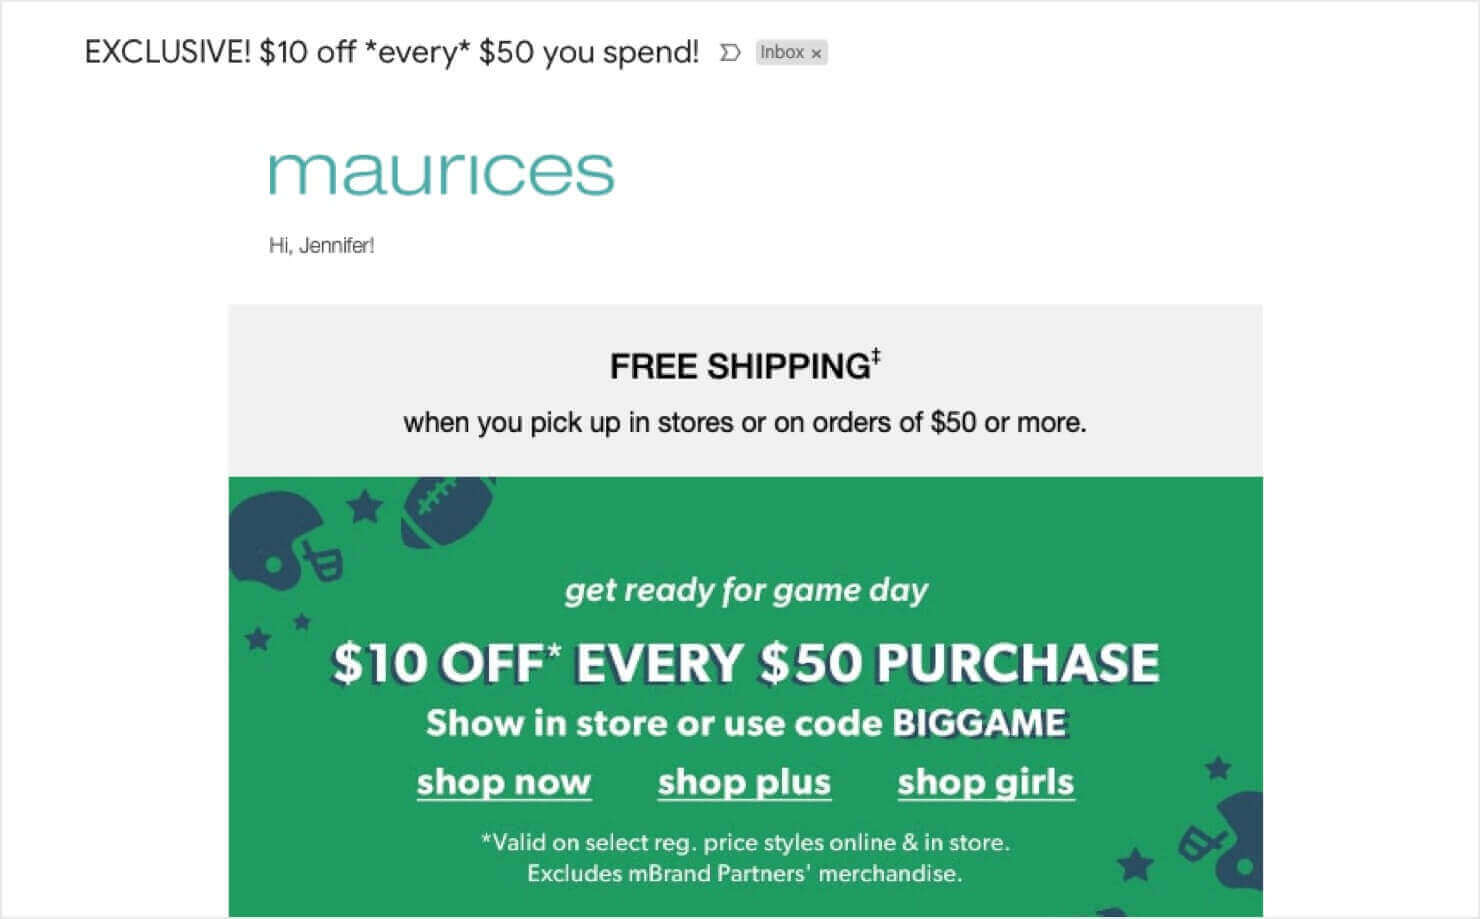 eCommerce email example from Maurices. Subject line says "Exclusive!  off *every*  you spend!" Email reads, "Hi Jennifer! get ready for game day.  OFF* EVERY  PURCHASE. Show in store or use code BIGGAME." There's also a free shipping message, special terms of the deal, and CTA links to shop different product categories.